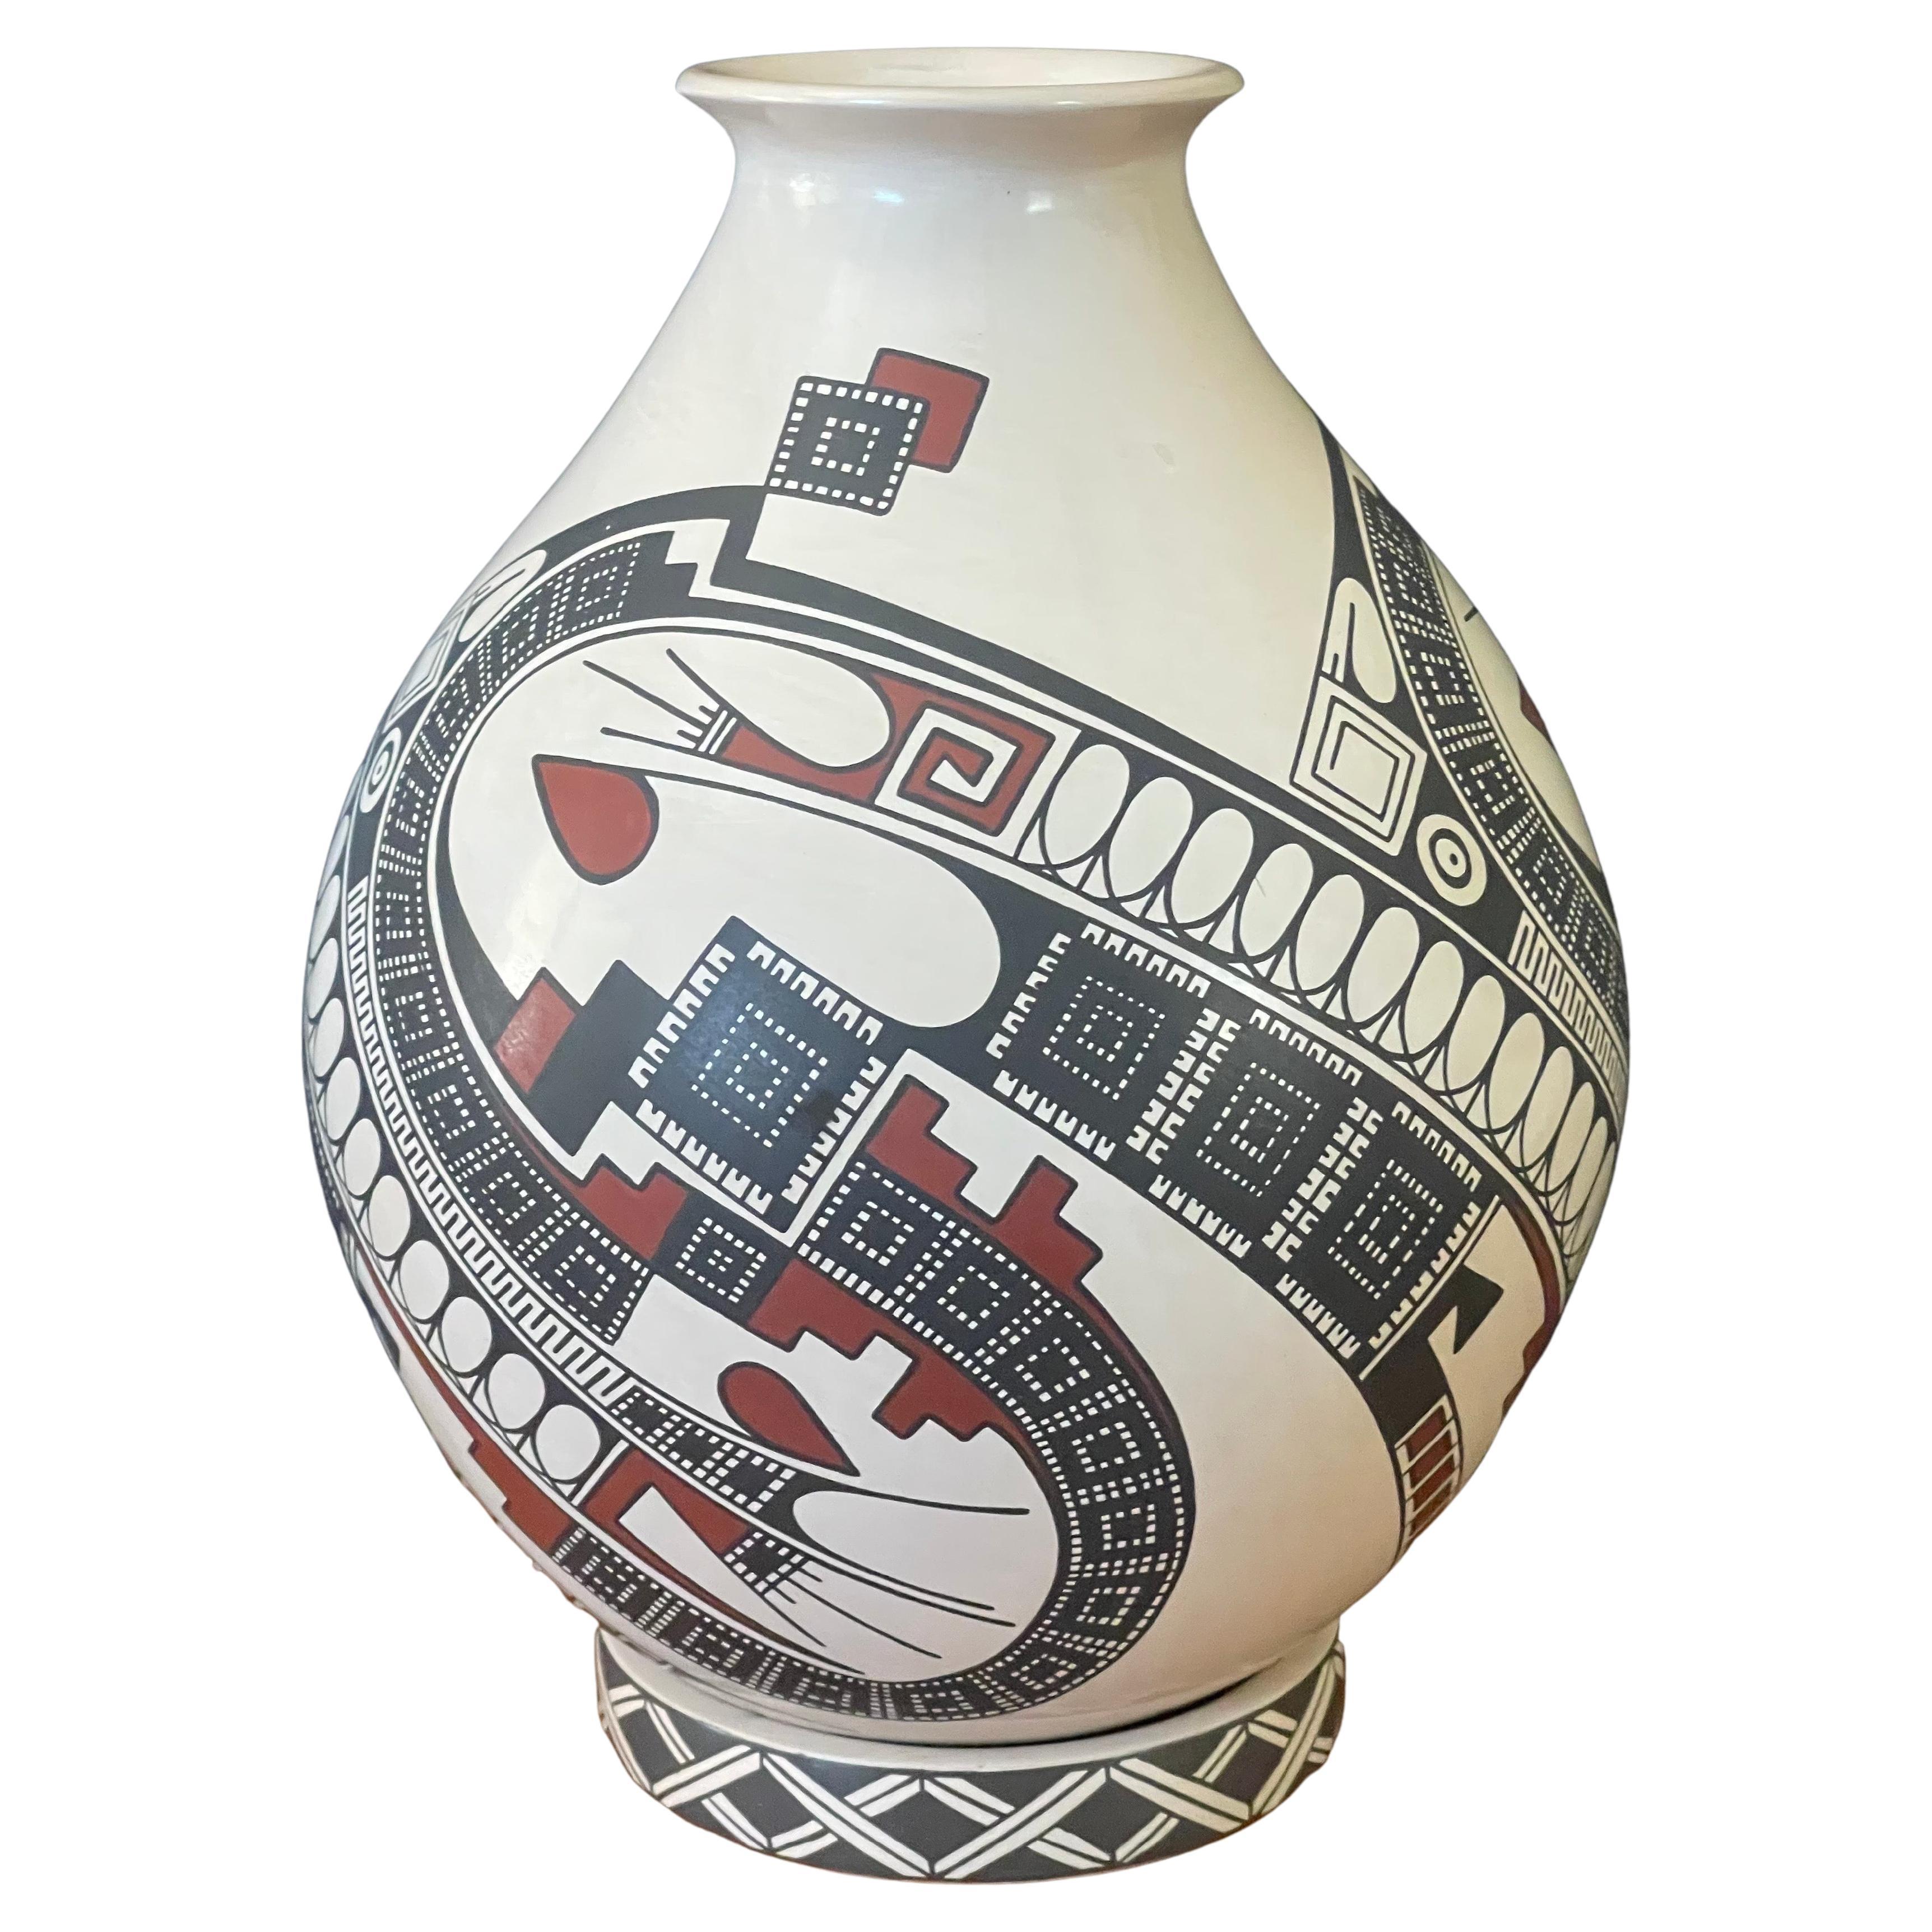 Large "Paquime Pottery" Jar / Olla by Jorge Quintana for Mata Ortiz